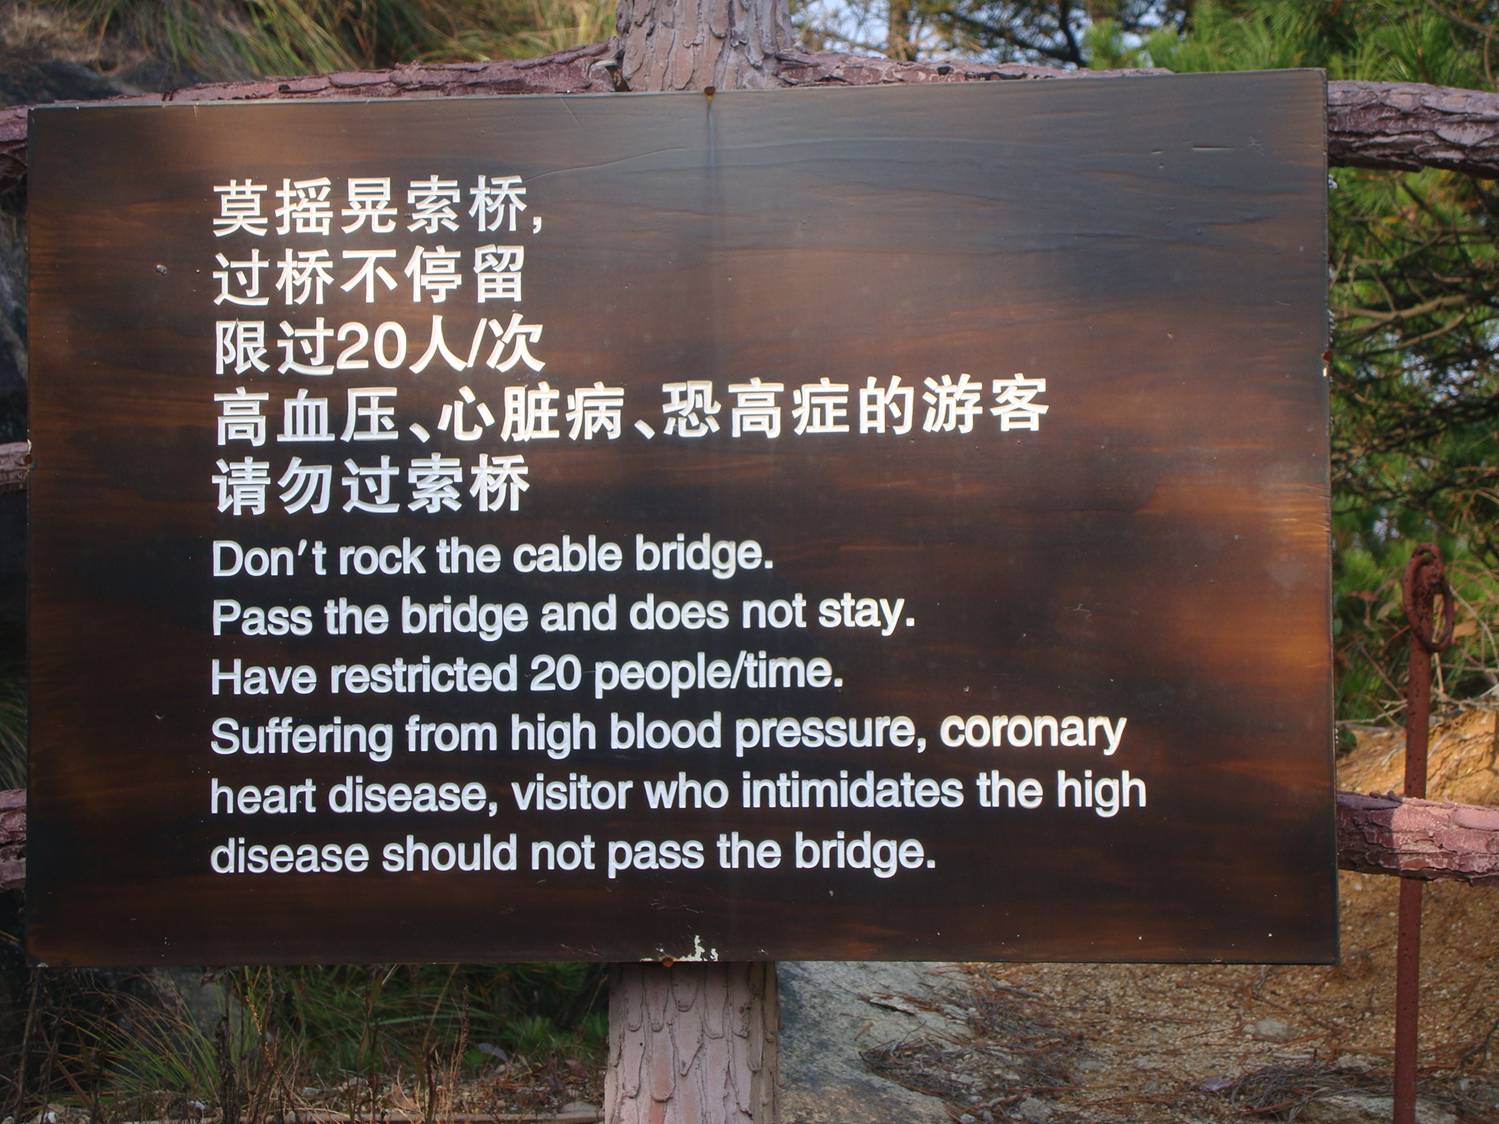 Picture:  I love it when Chinglish is written on stone or wood.  Warning sign at the cable suspended foot bridge, Daming Shan, Zhejiang, China